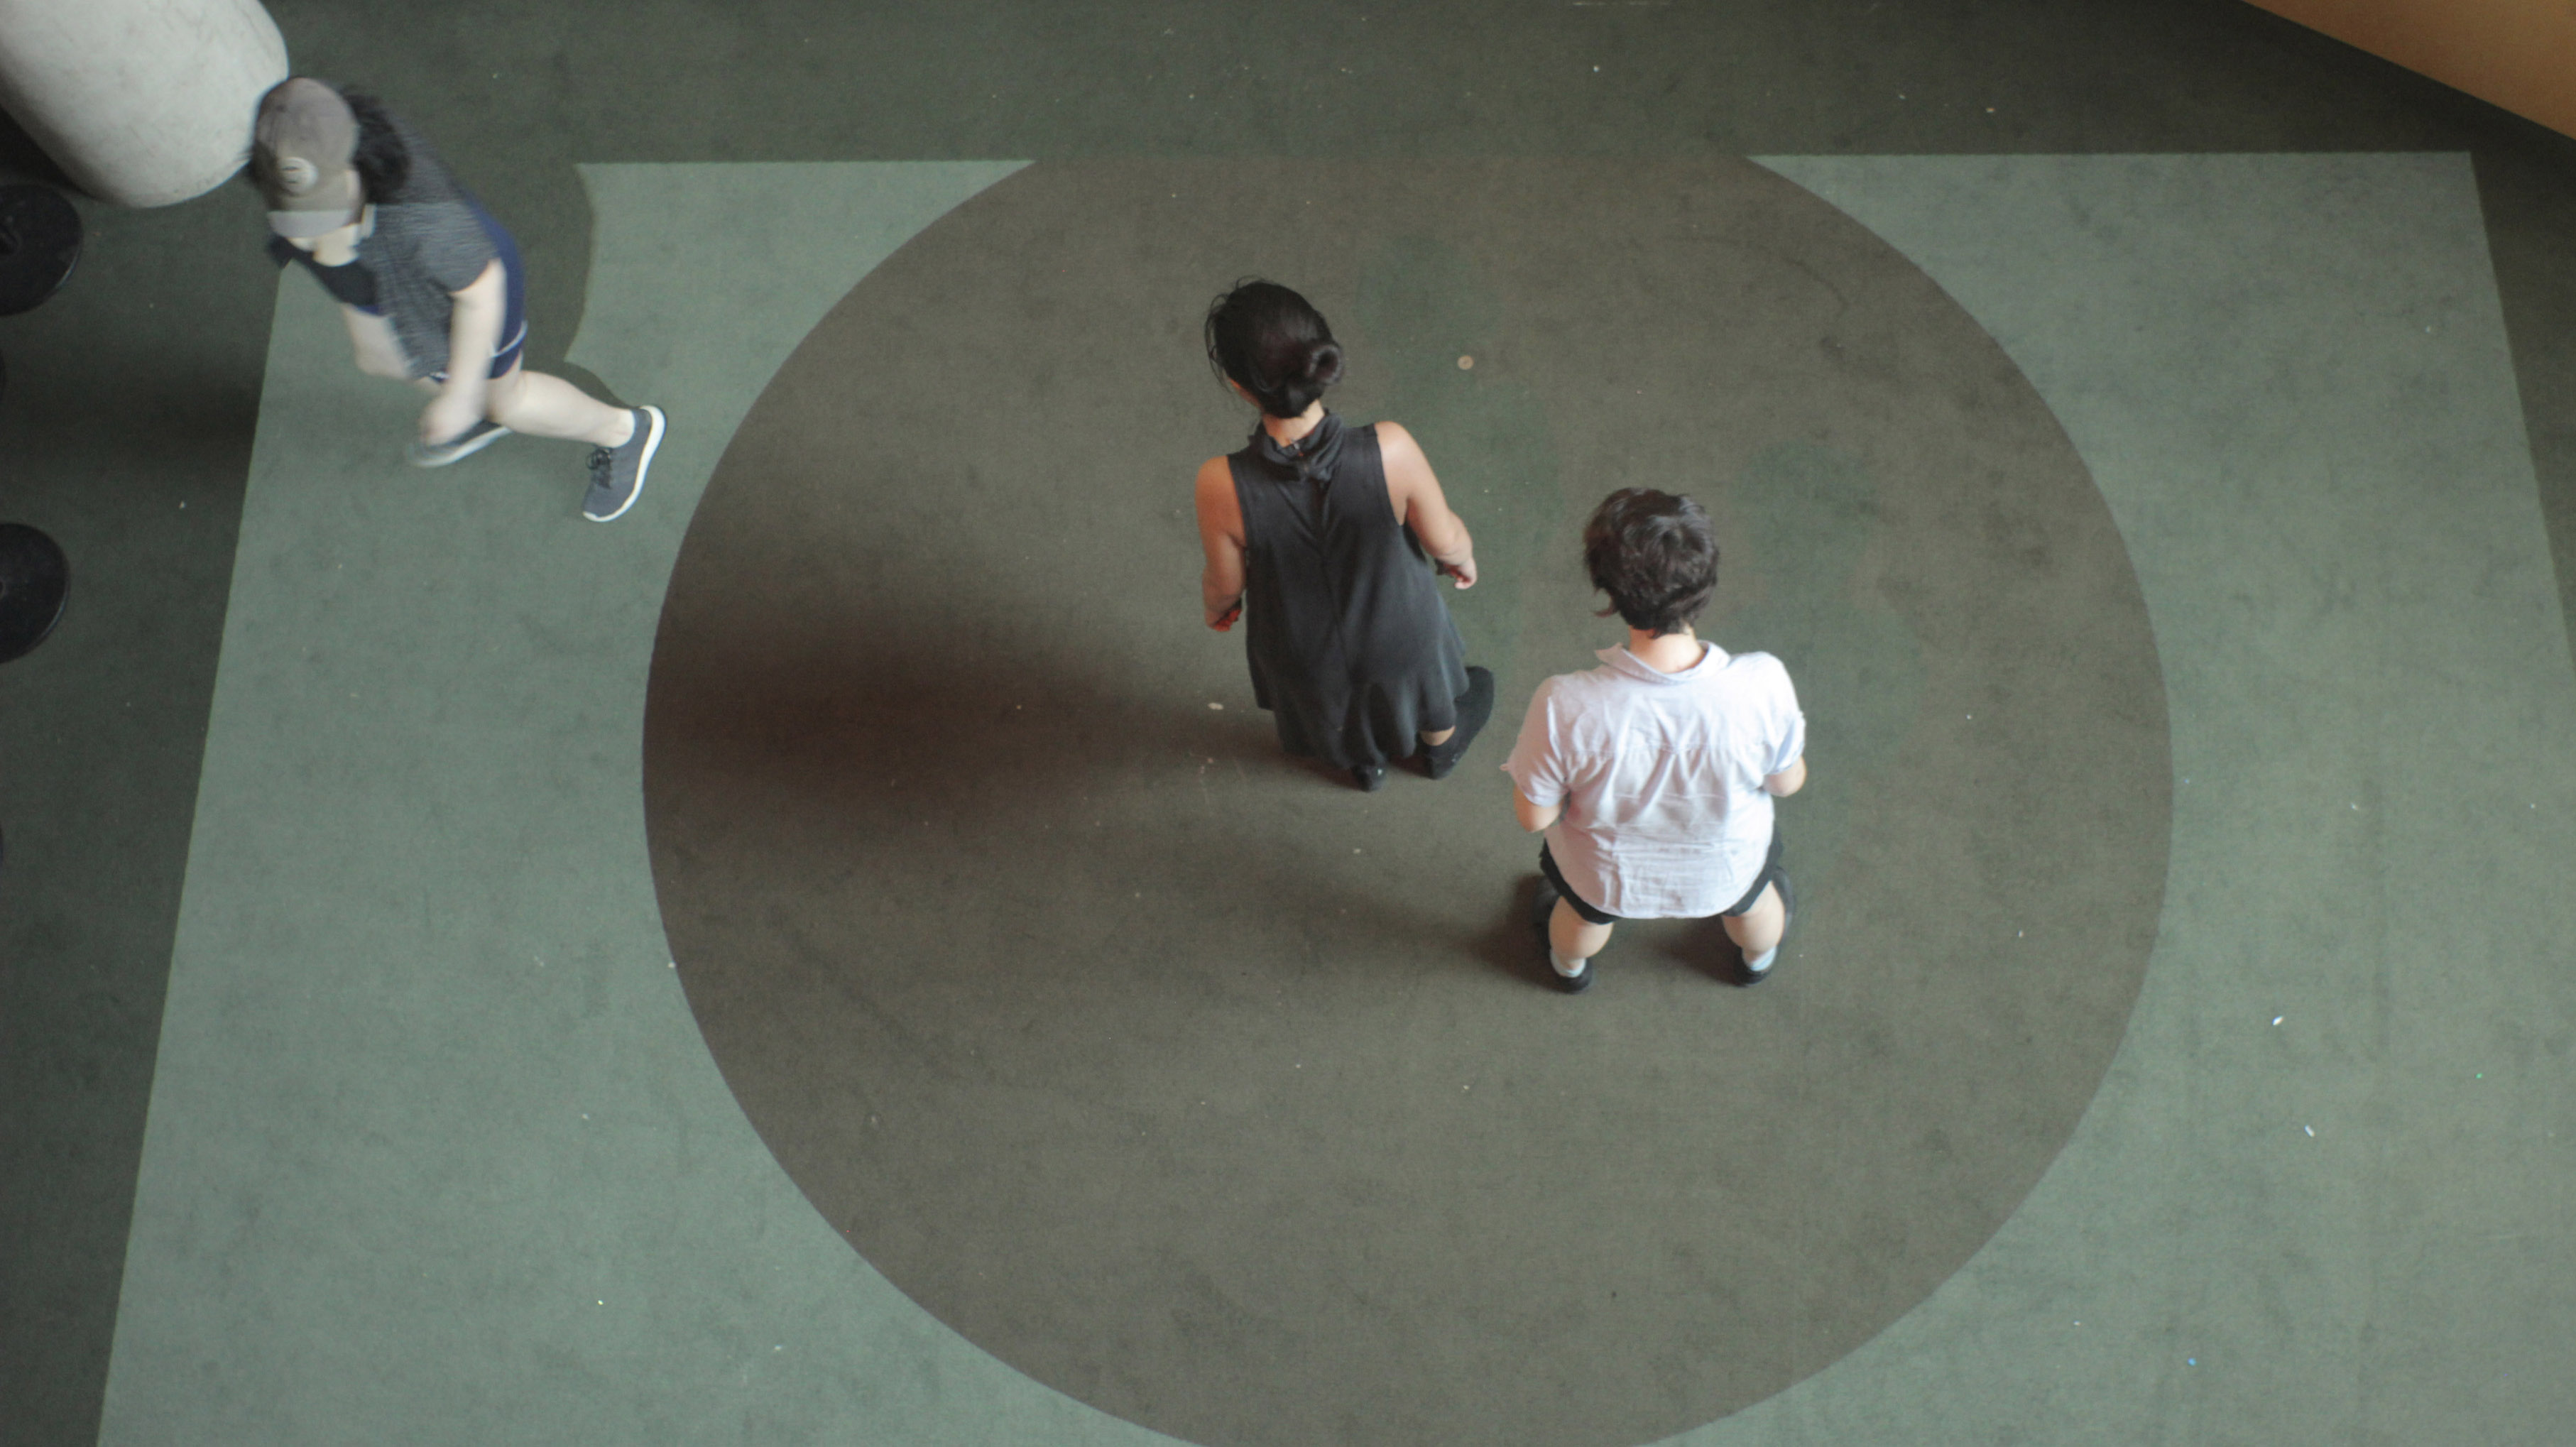 View full size version of a bird's-eye view of two people standing in a projected circle